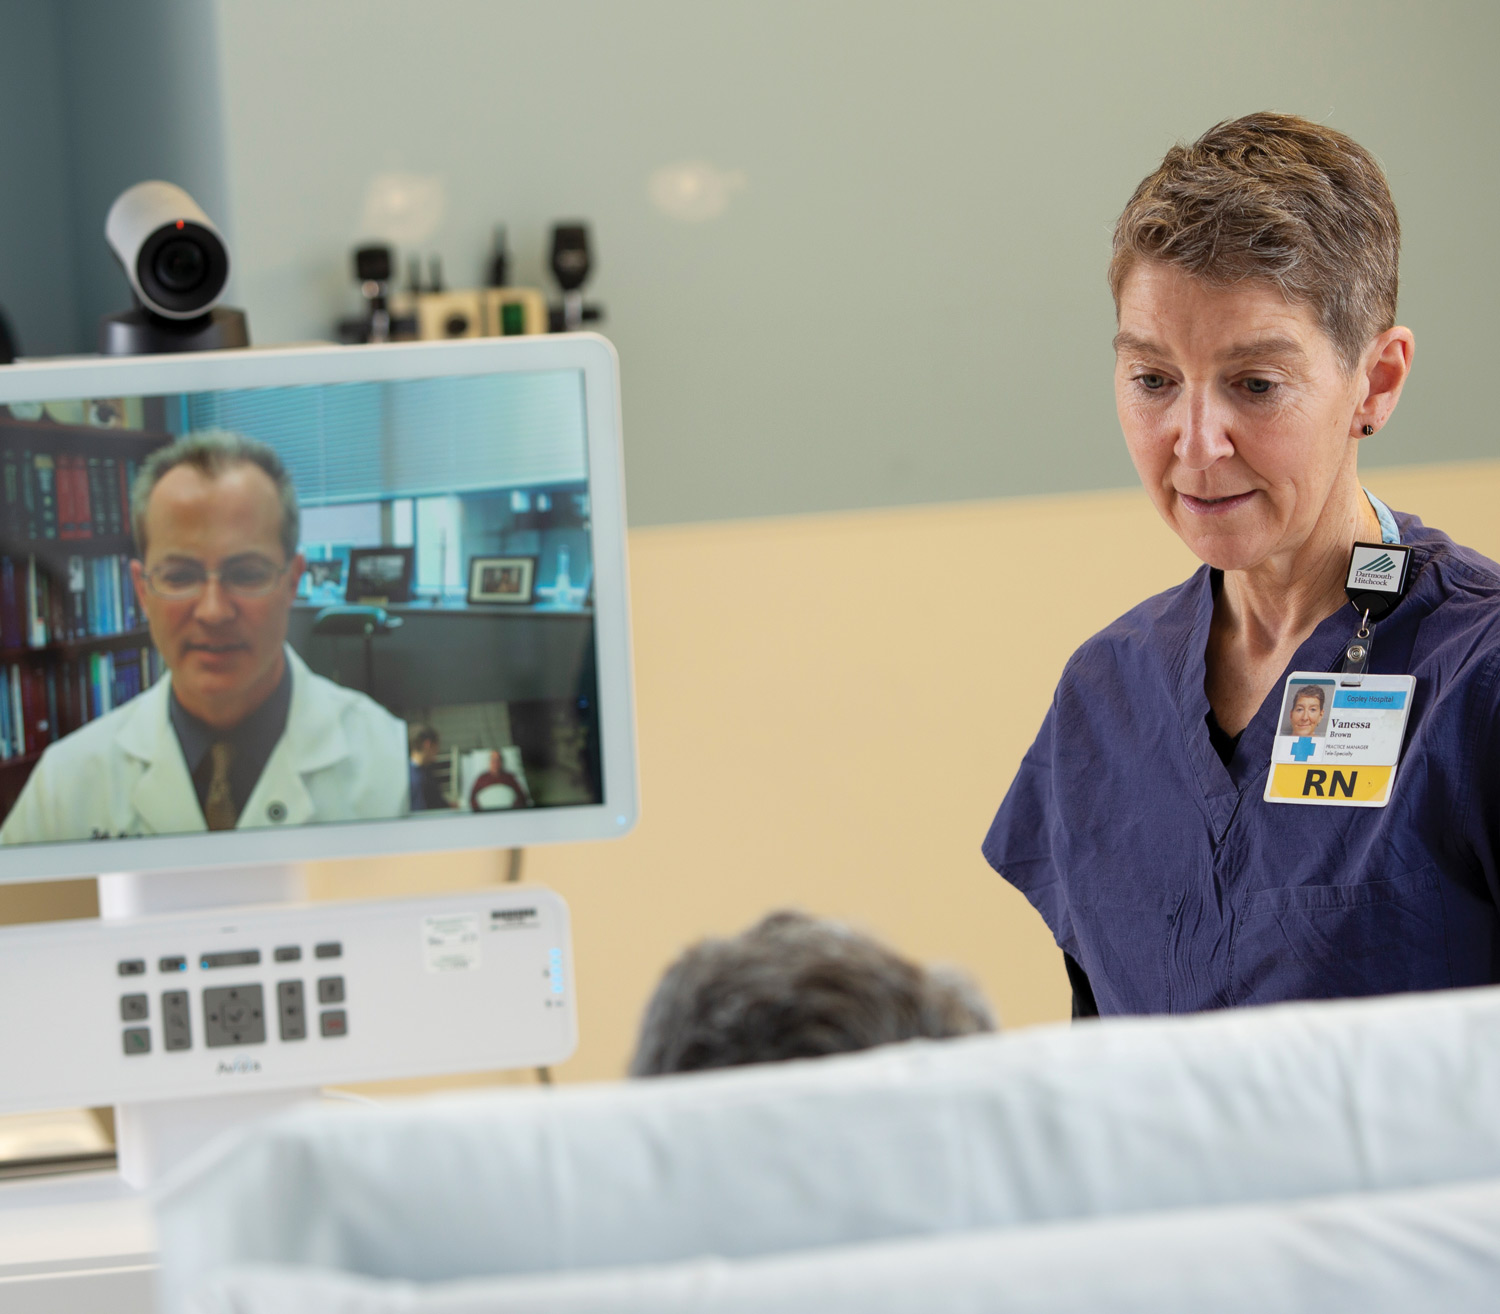 Keith McAvoy, MD, medical director of the teleNeurology service and section chief of general neurology at Dartmouth Hitchcock Clinics Manchester (shown on screen) consults with a bedside clinician and a patient via a telehealth cart. (Photo taken prior to COVID-19 protocols.)